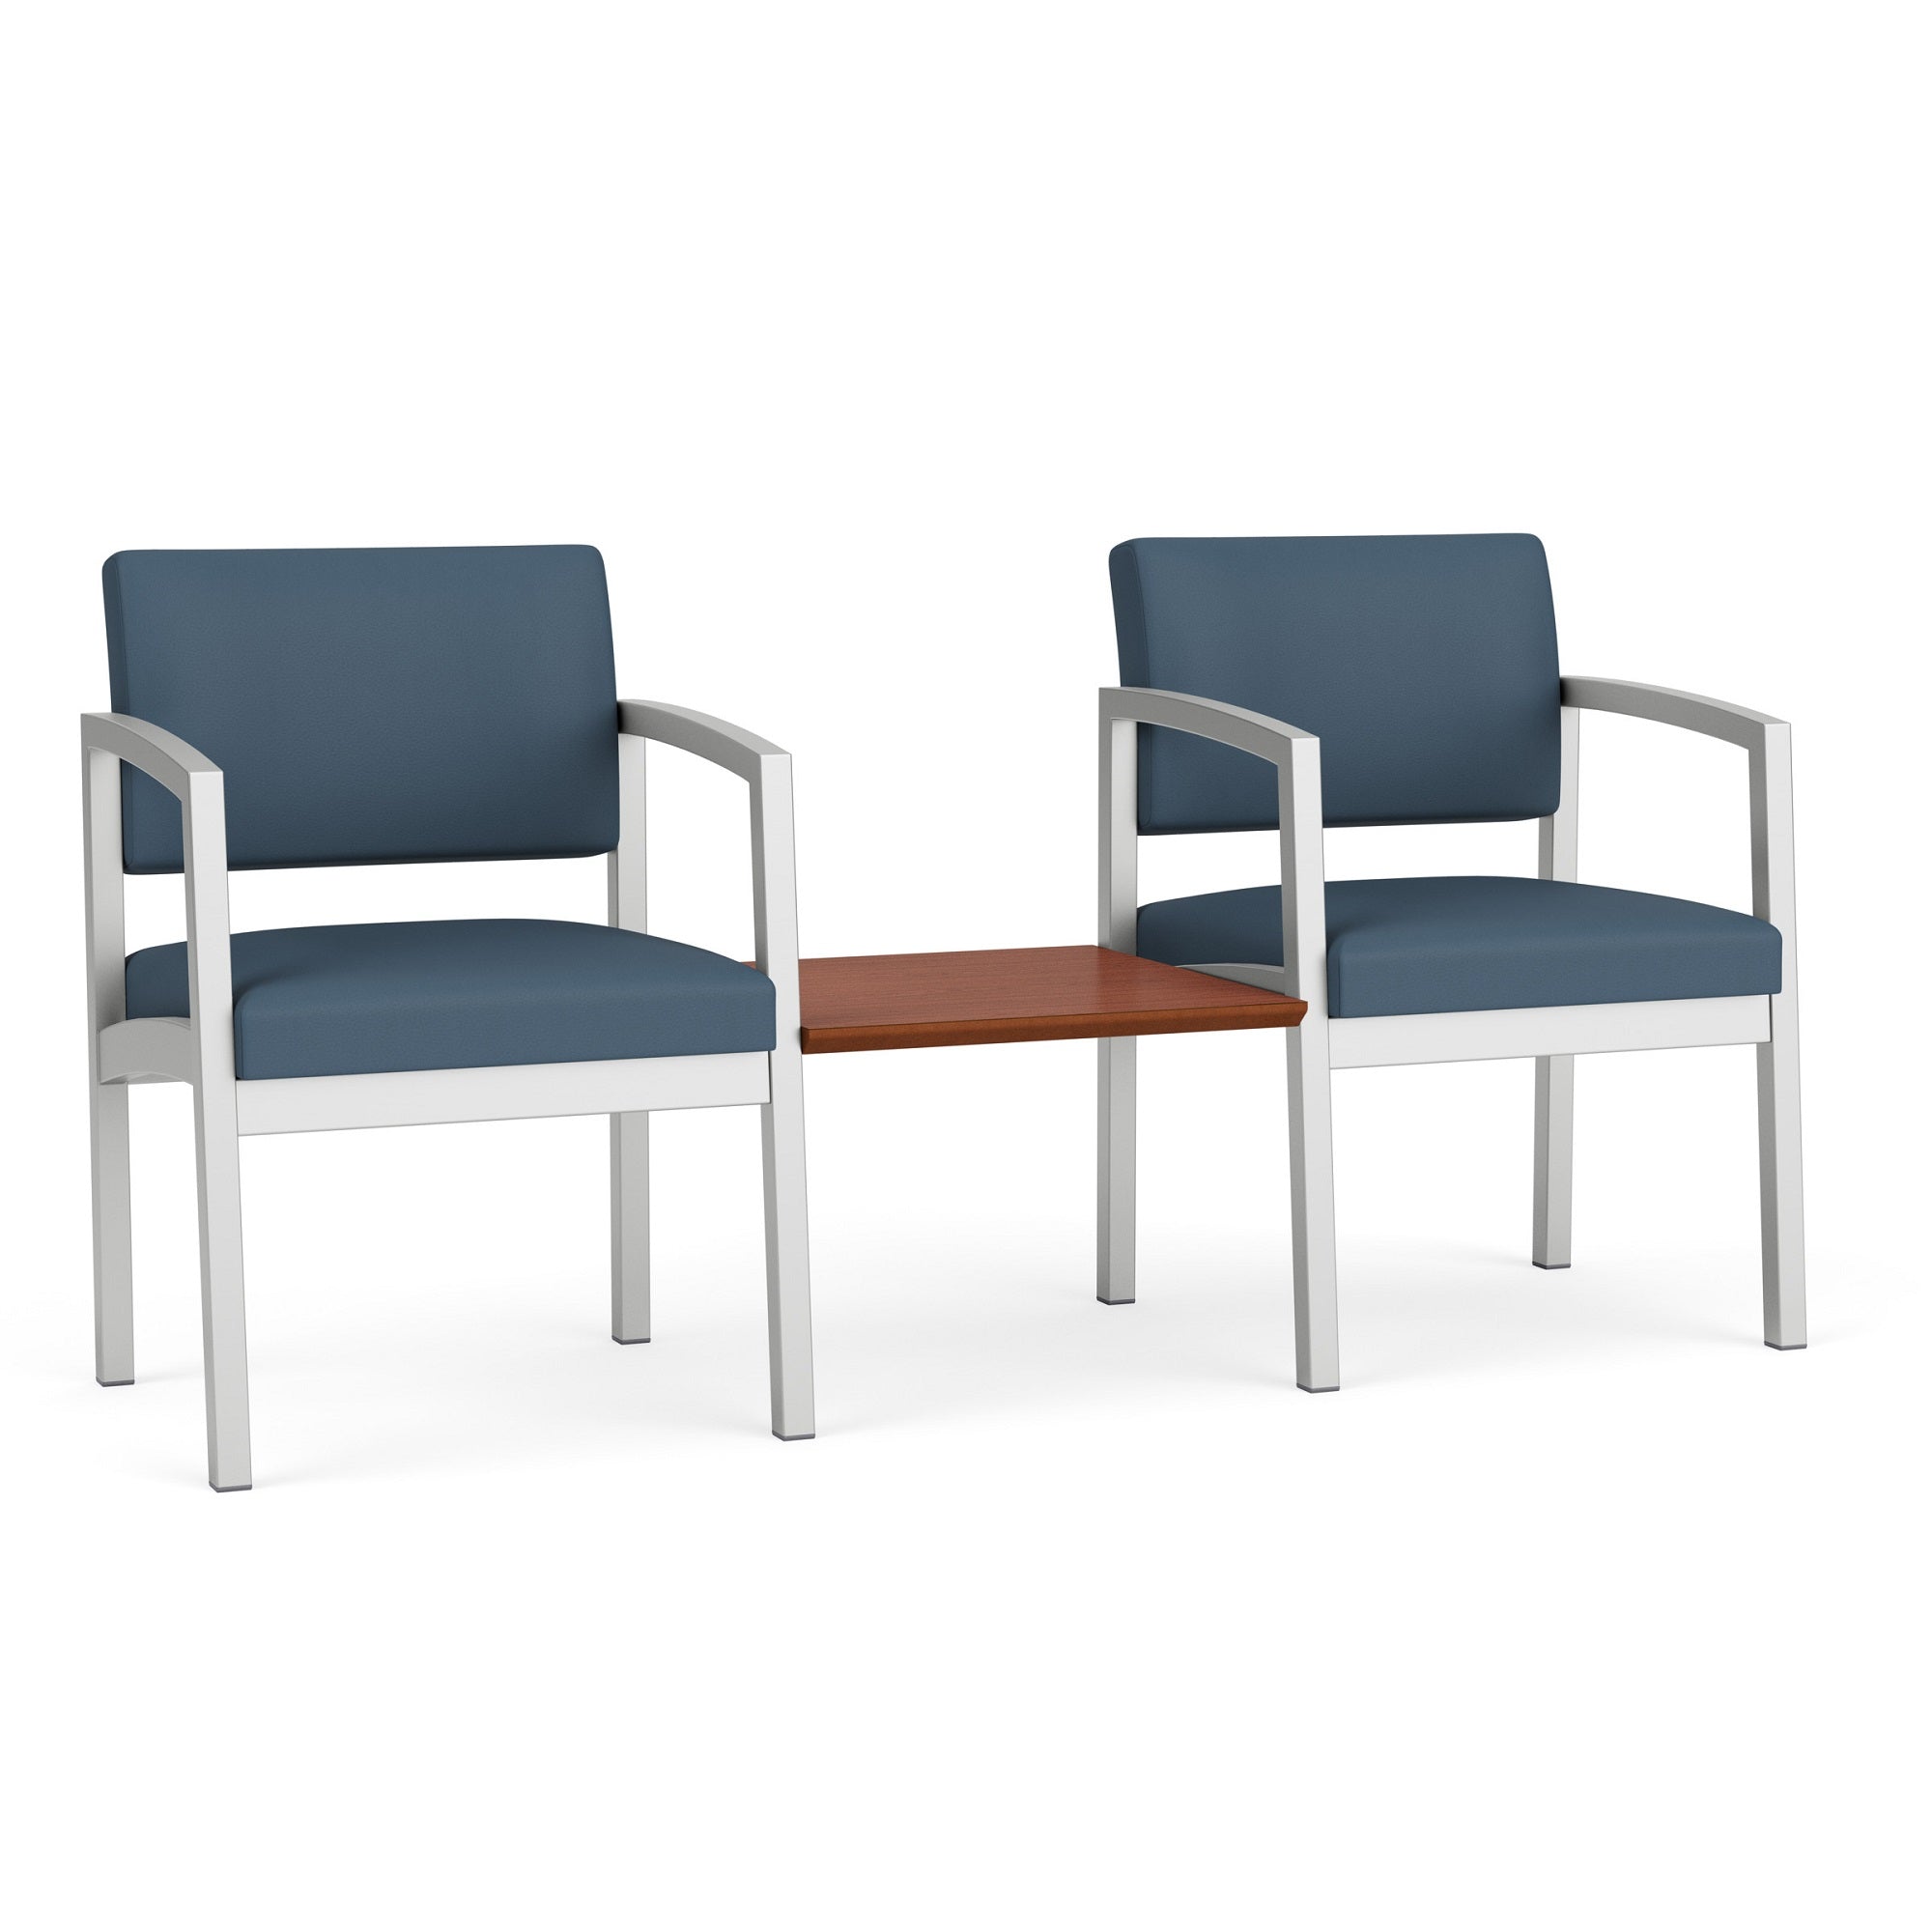 Lenox Steel Collection Reception Seating, 2 Chairs with Connecting Center Table, Standard Vinyl Upholstery, FREE SHIPPING